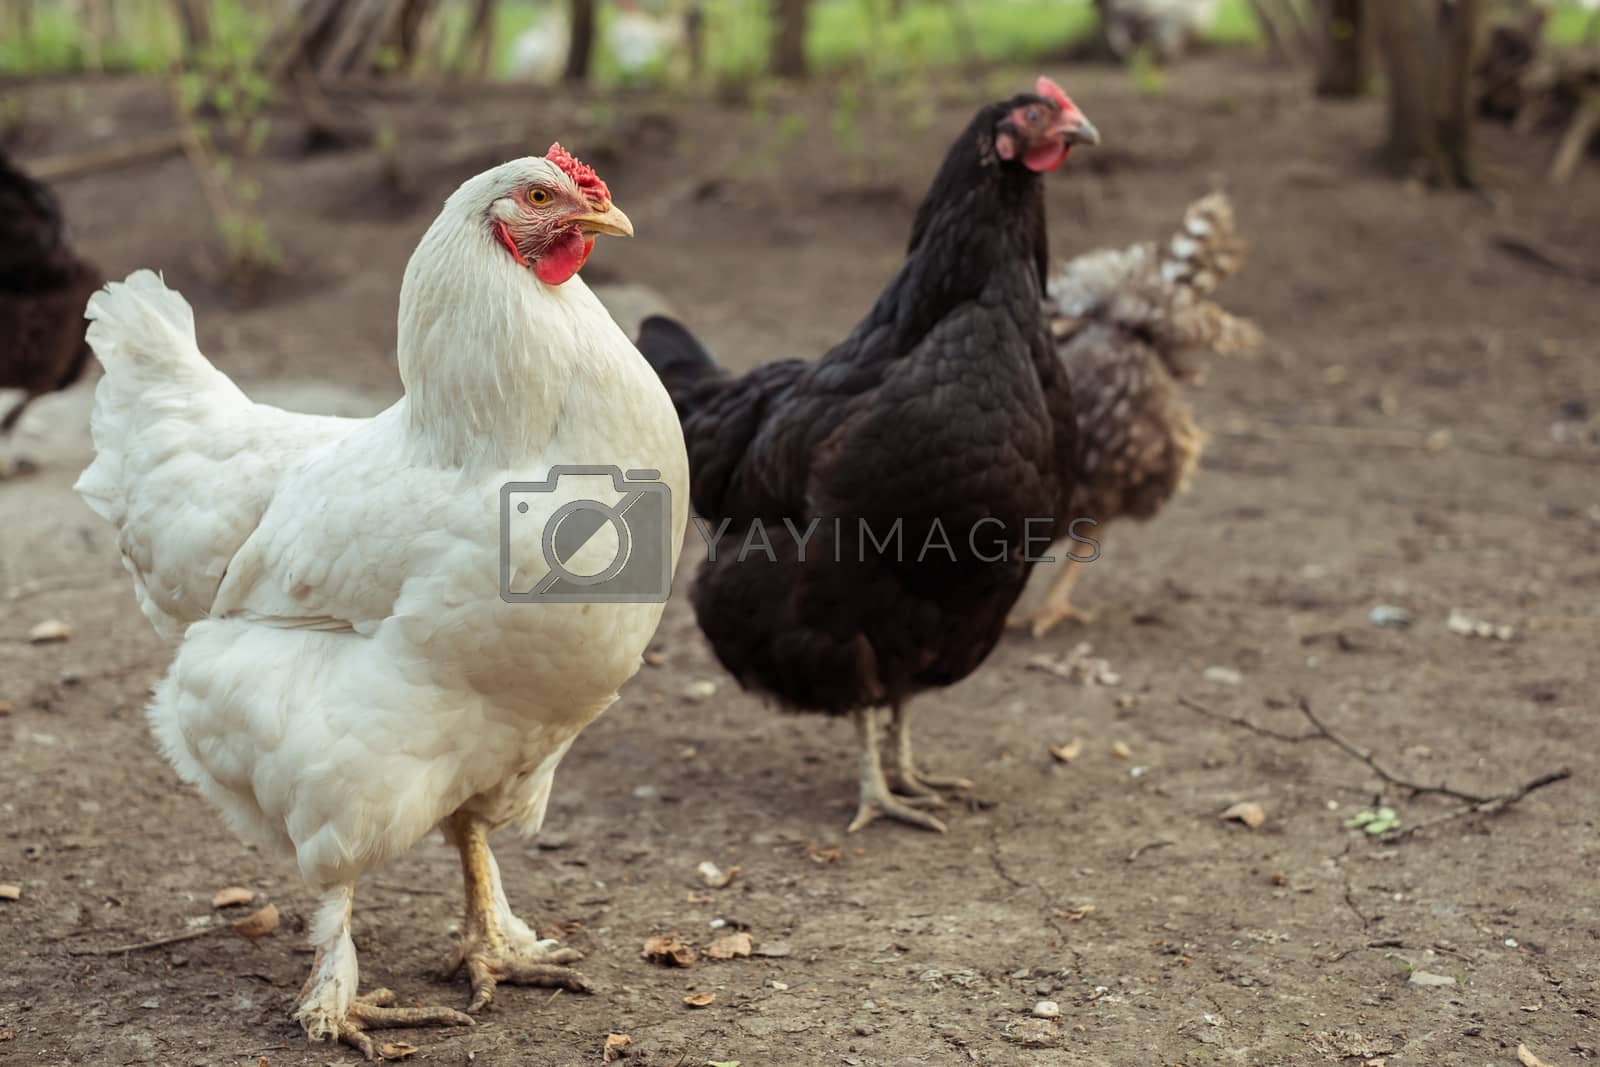 Royalty free image of chickens in the yard by Roberto